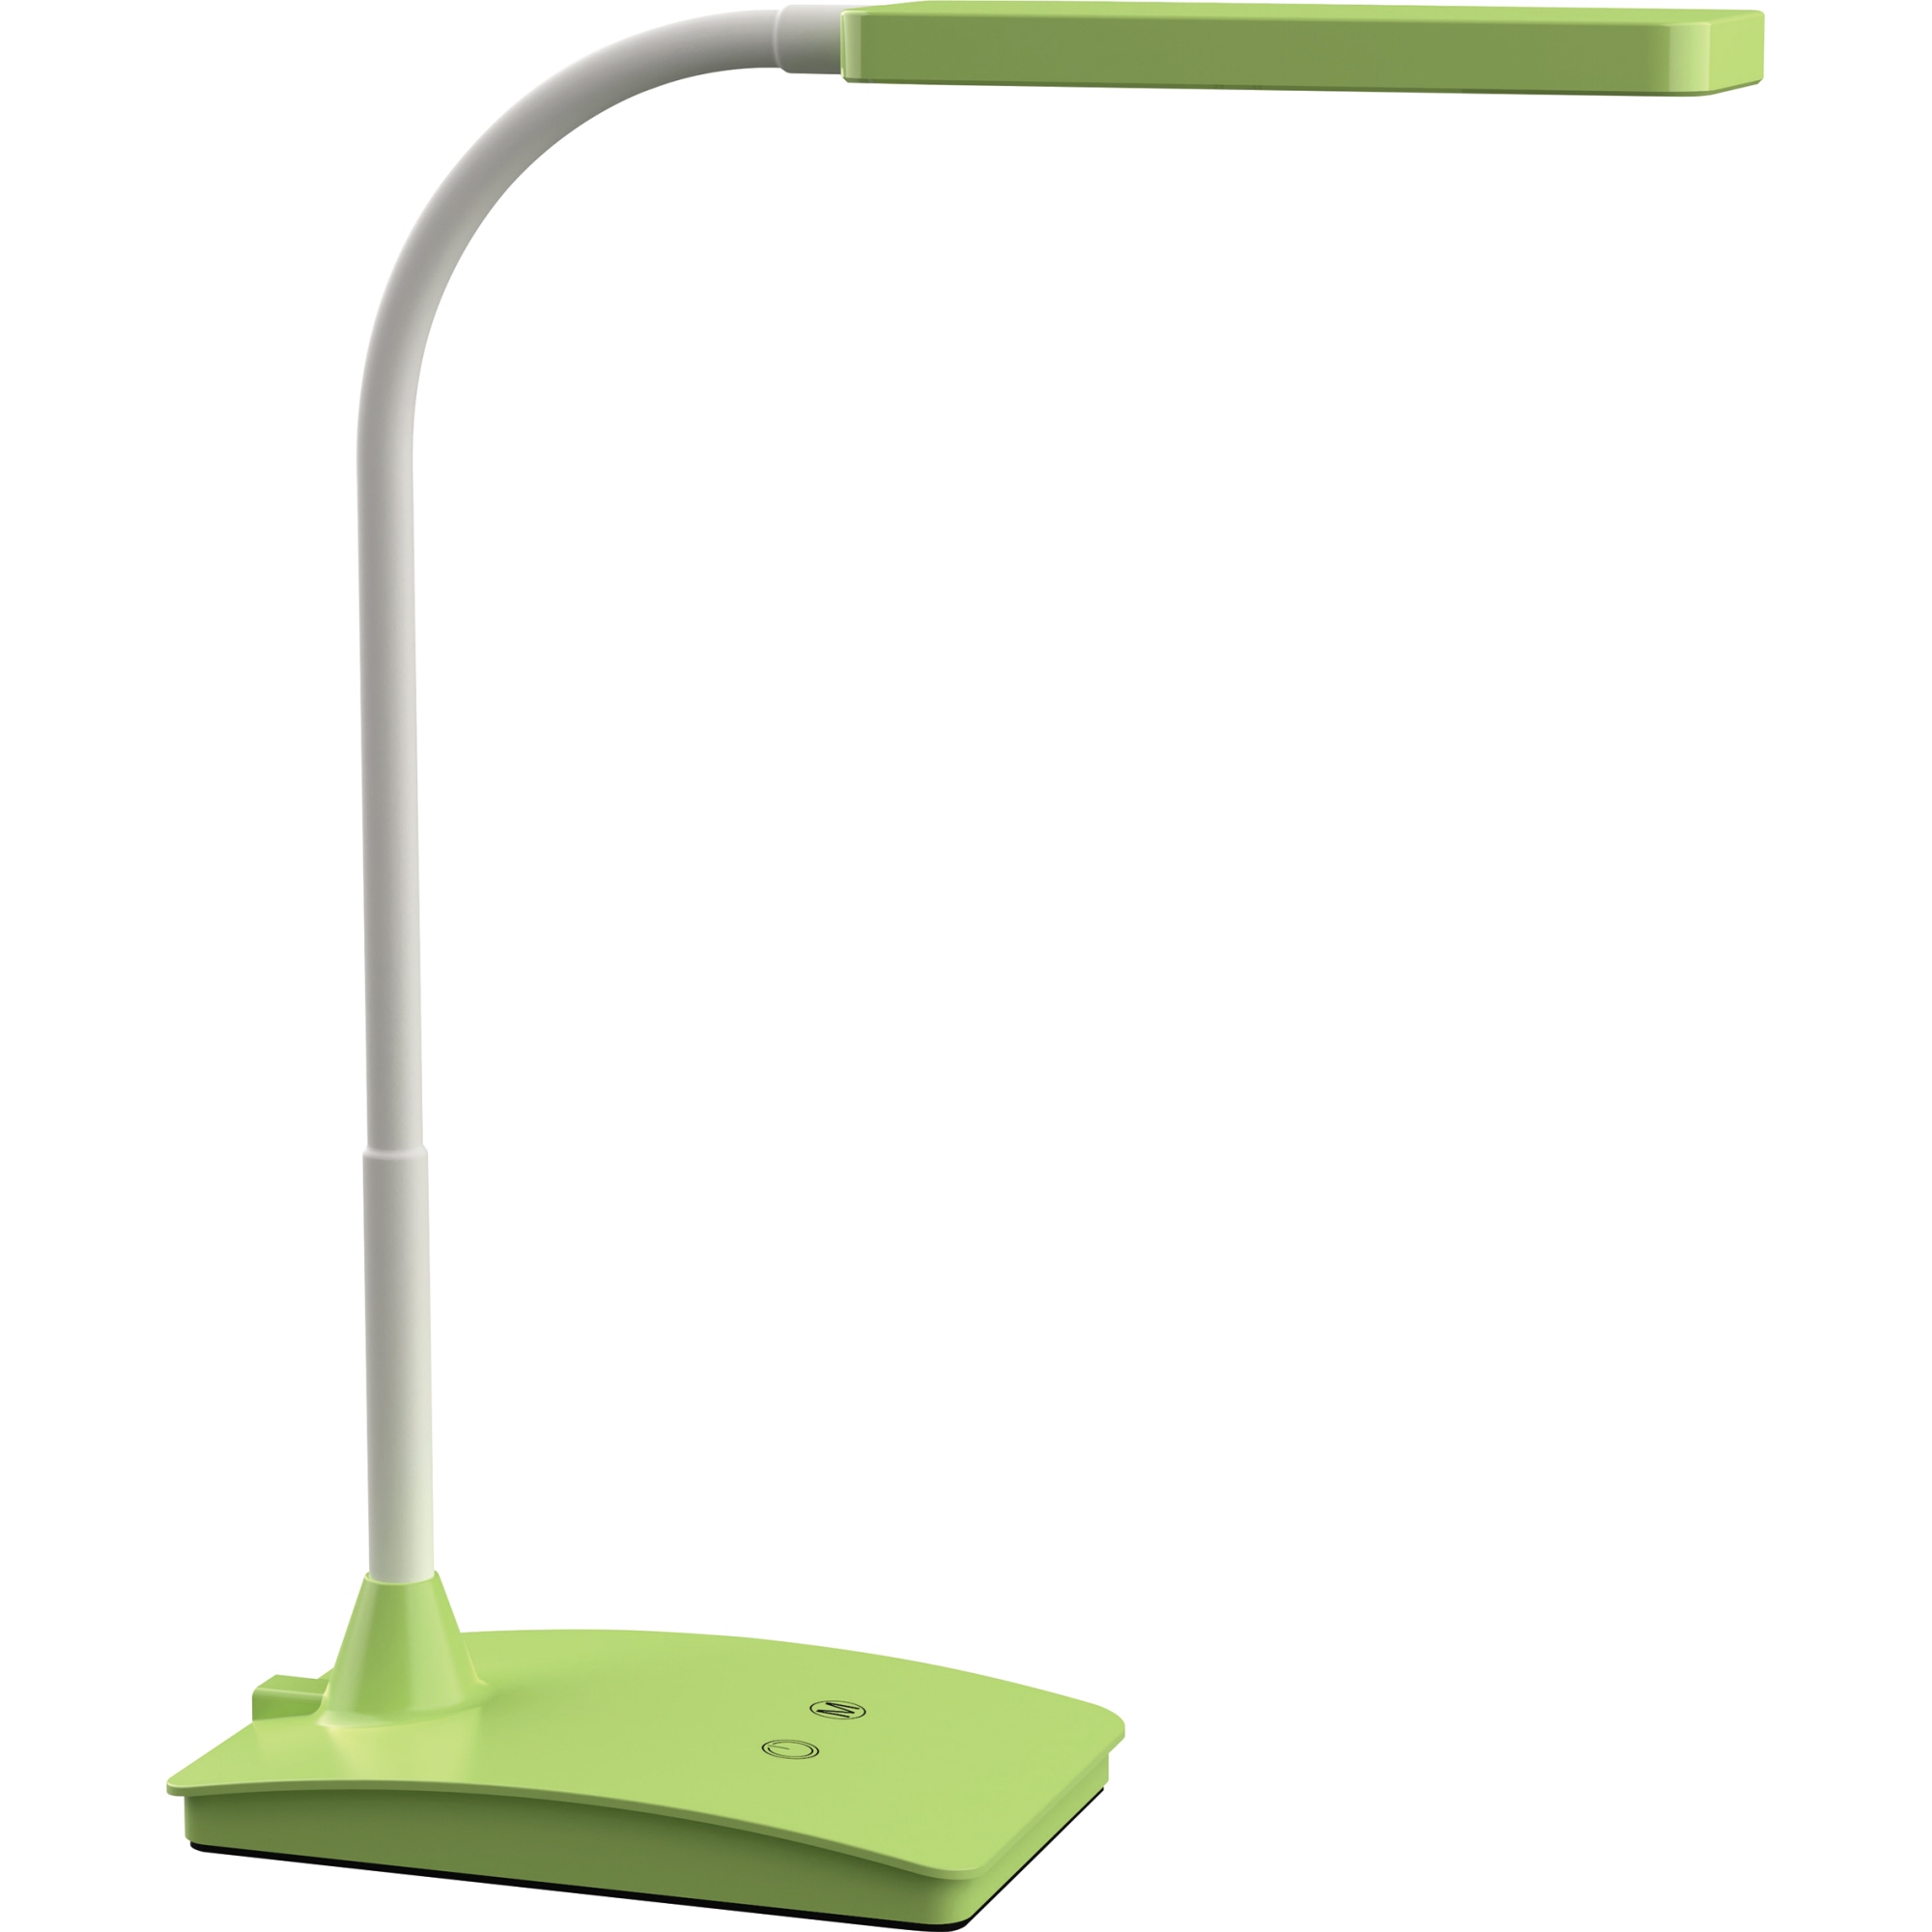 MAUL Tischleuchte MAULpearly colour vario LED 6W dimmbar lime